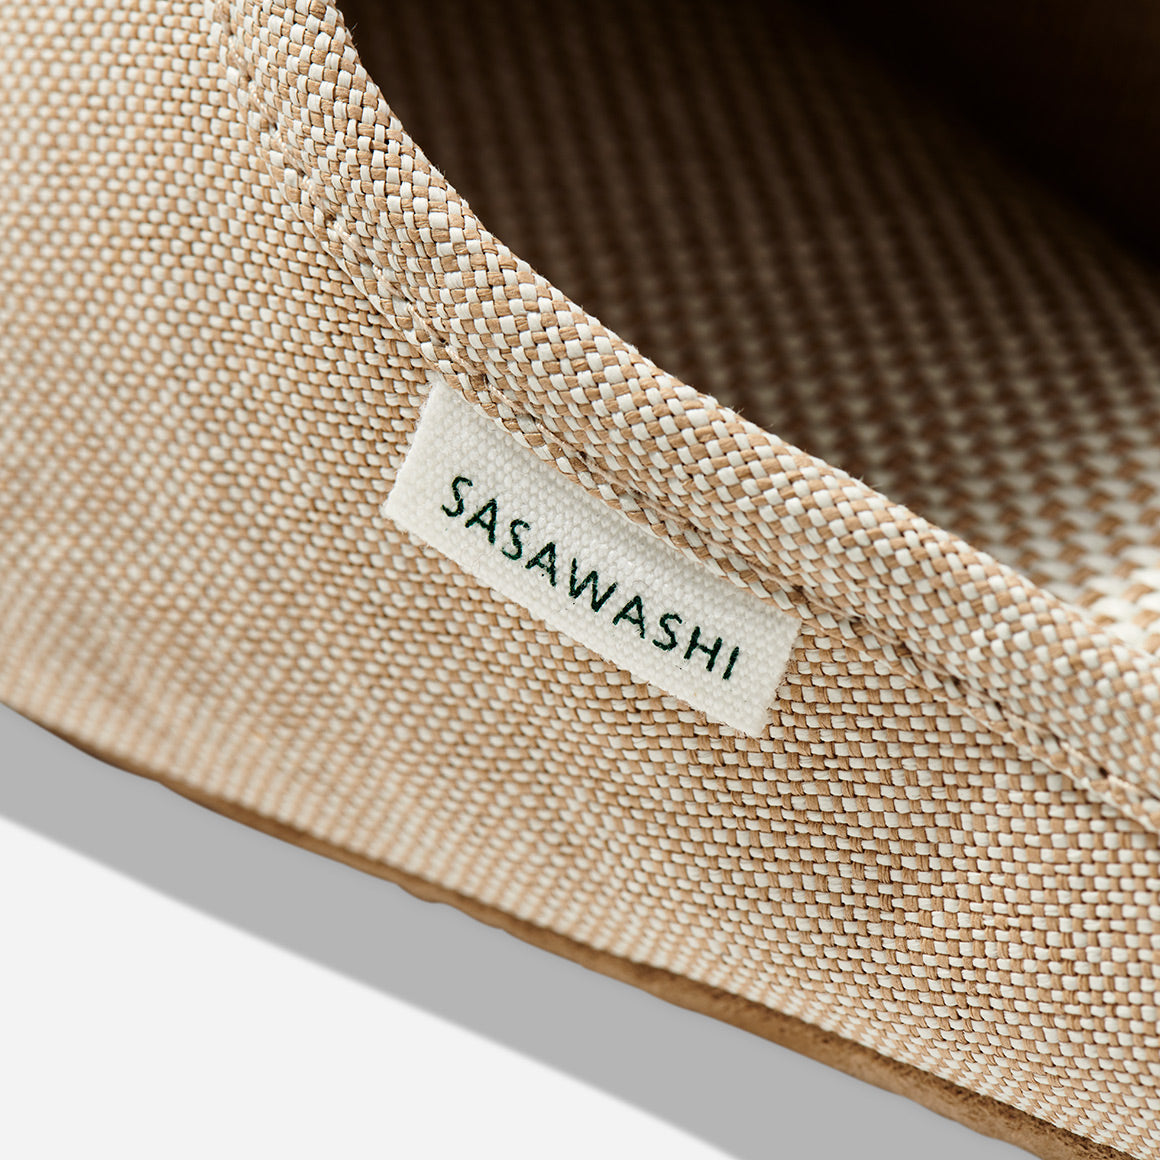 Up-close image of the side of a beige color slipper with Sasawashi written in black on a white tag.